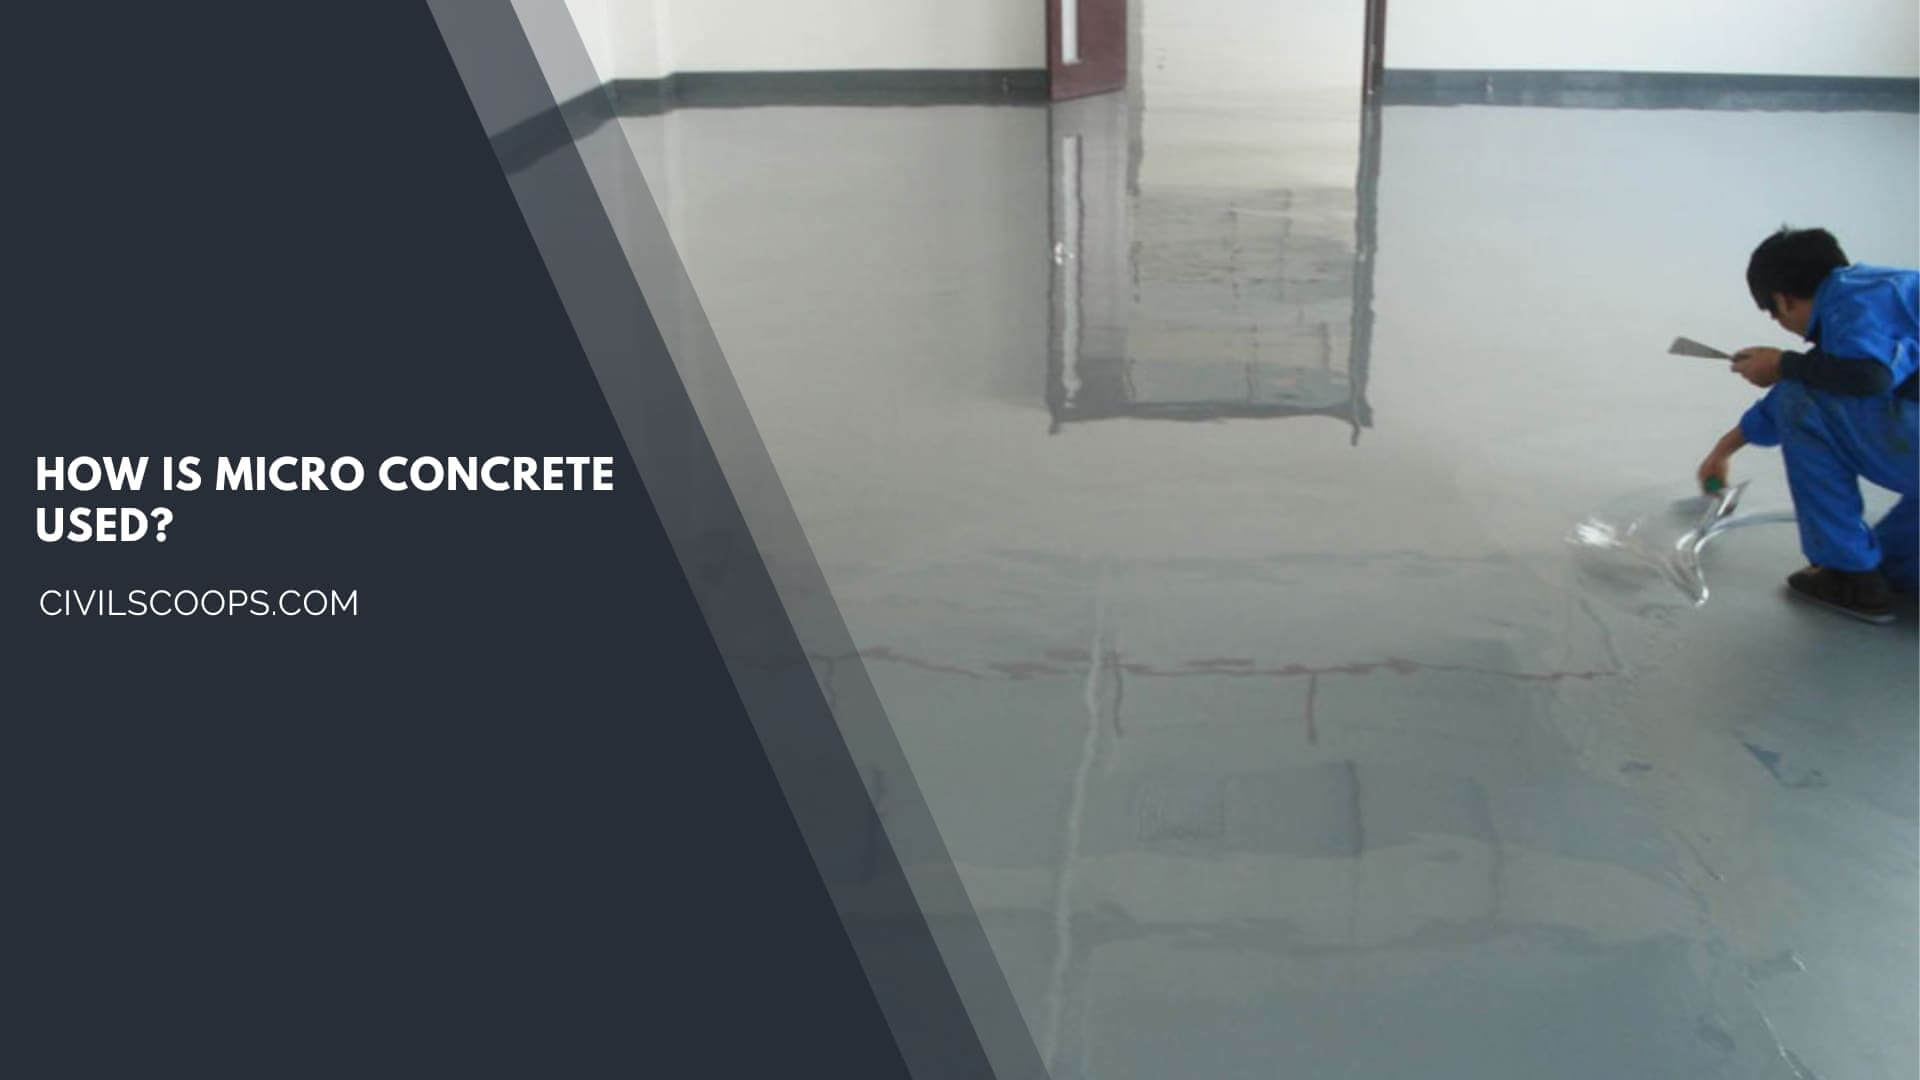 How Is Micro Concrete Used?